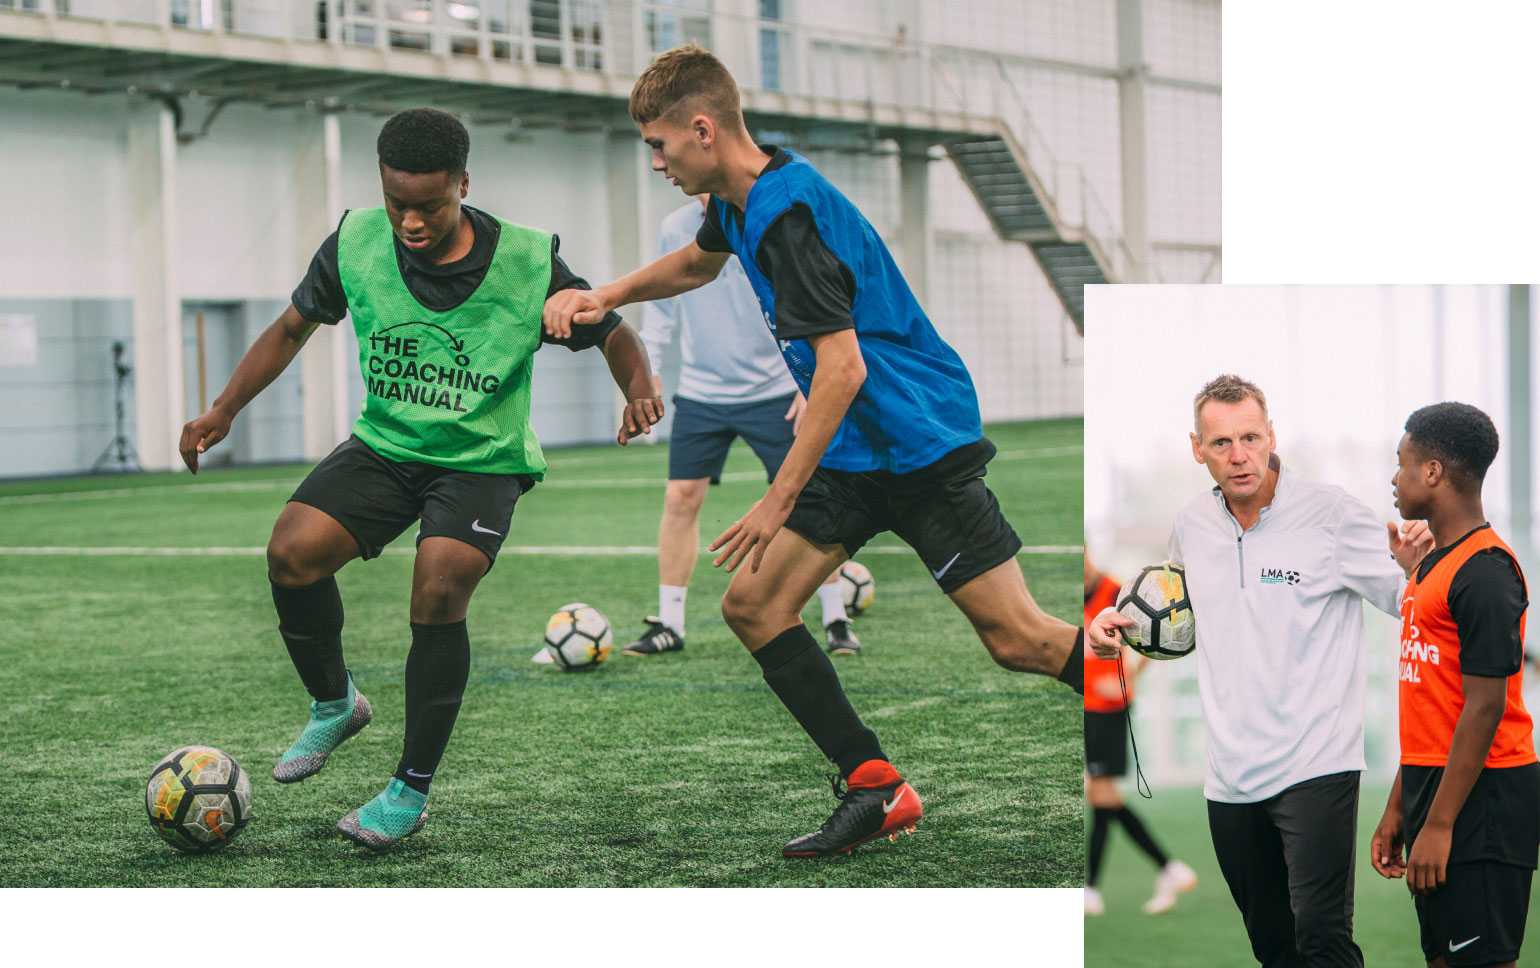 Two players jostling for the ball and Stuart Pearce explaining a coaching point to a player